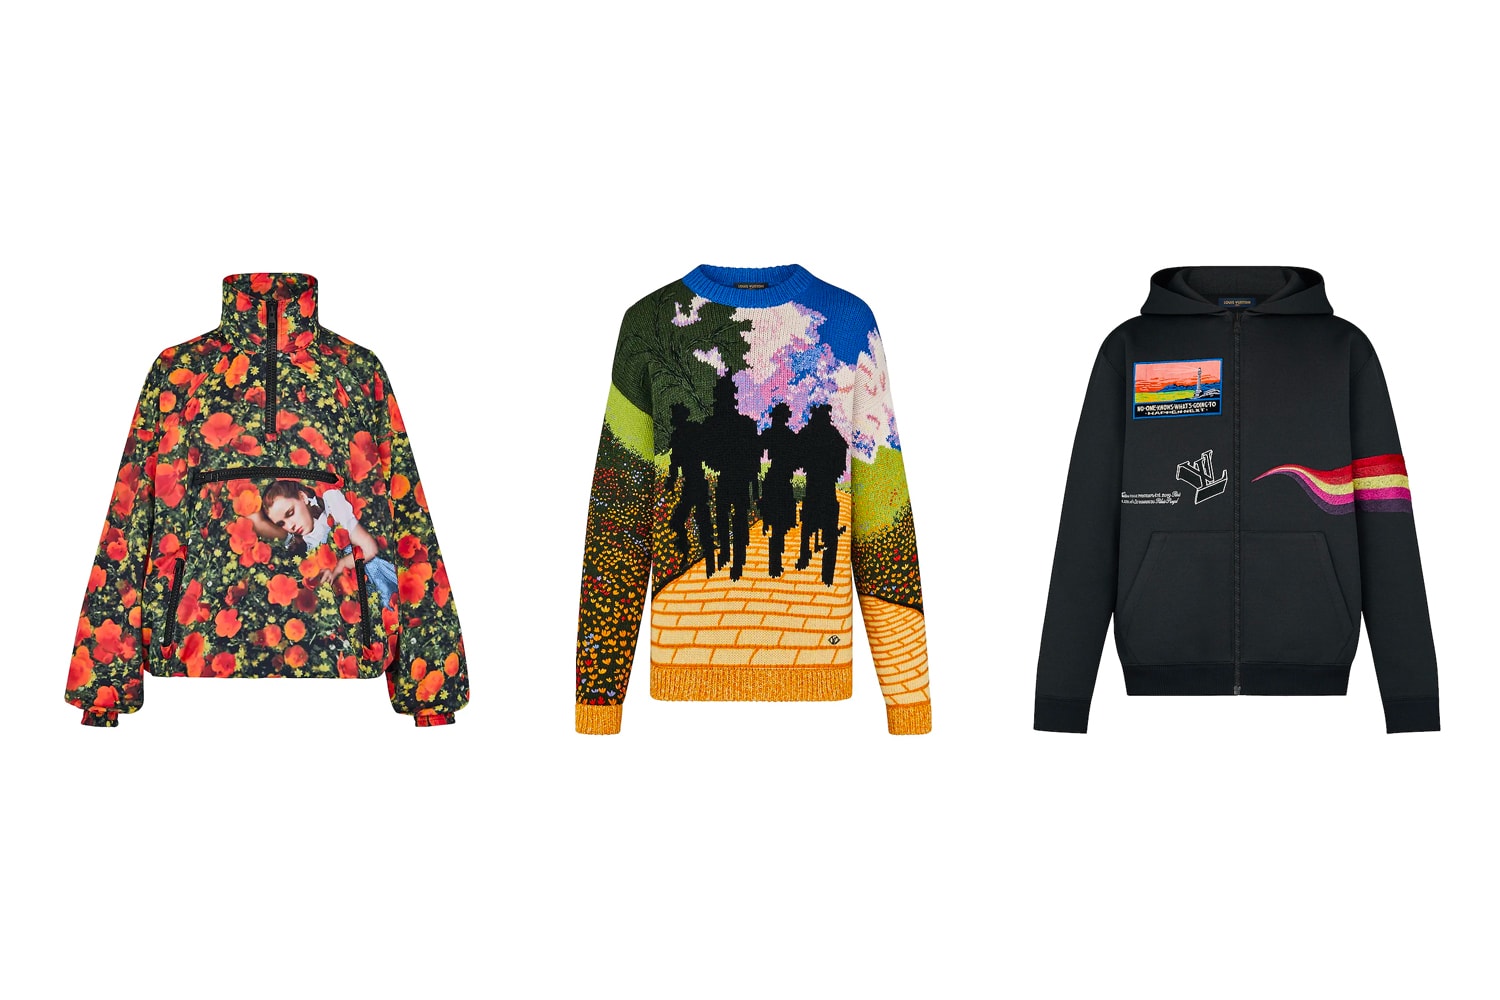 SS19 Louis Vuitton Collection Available Online